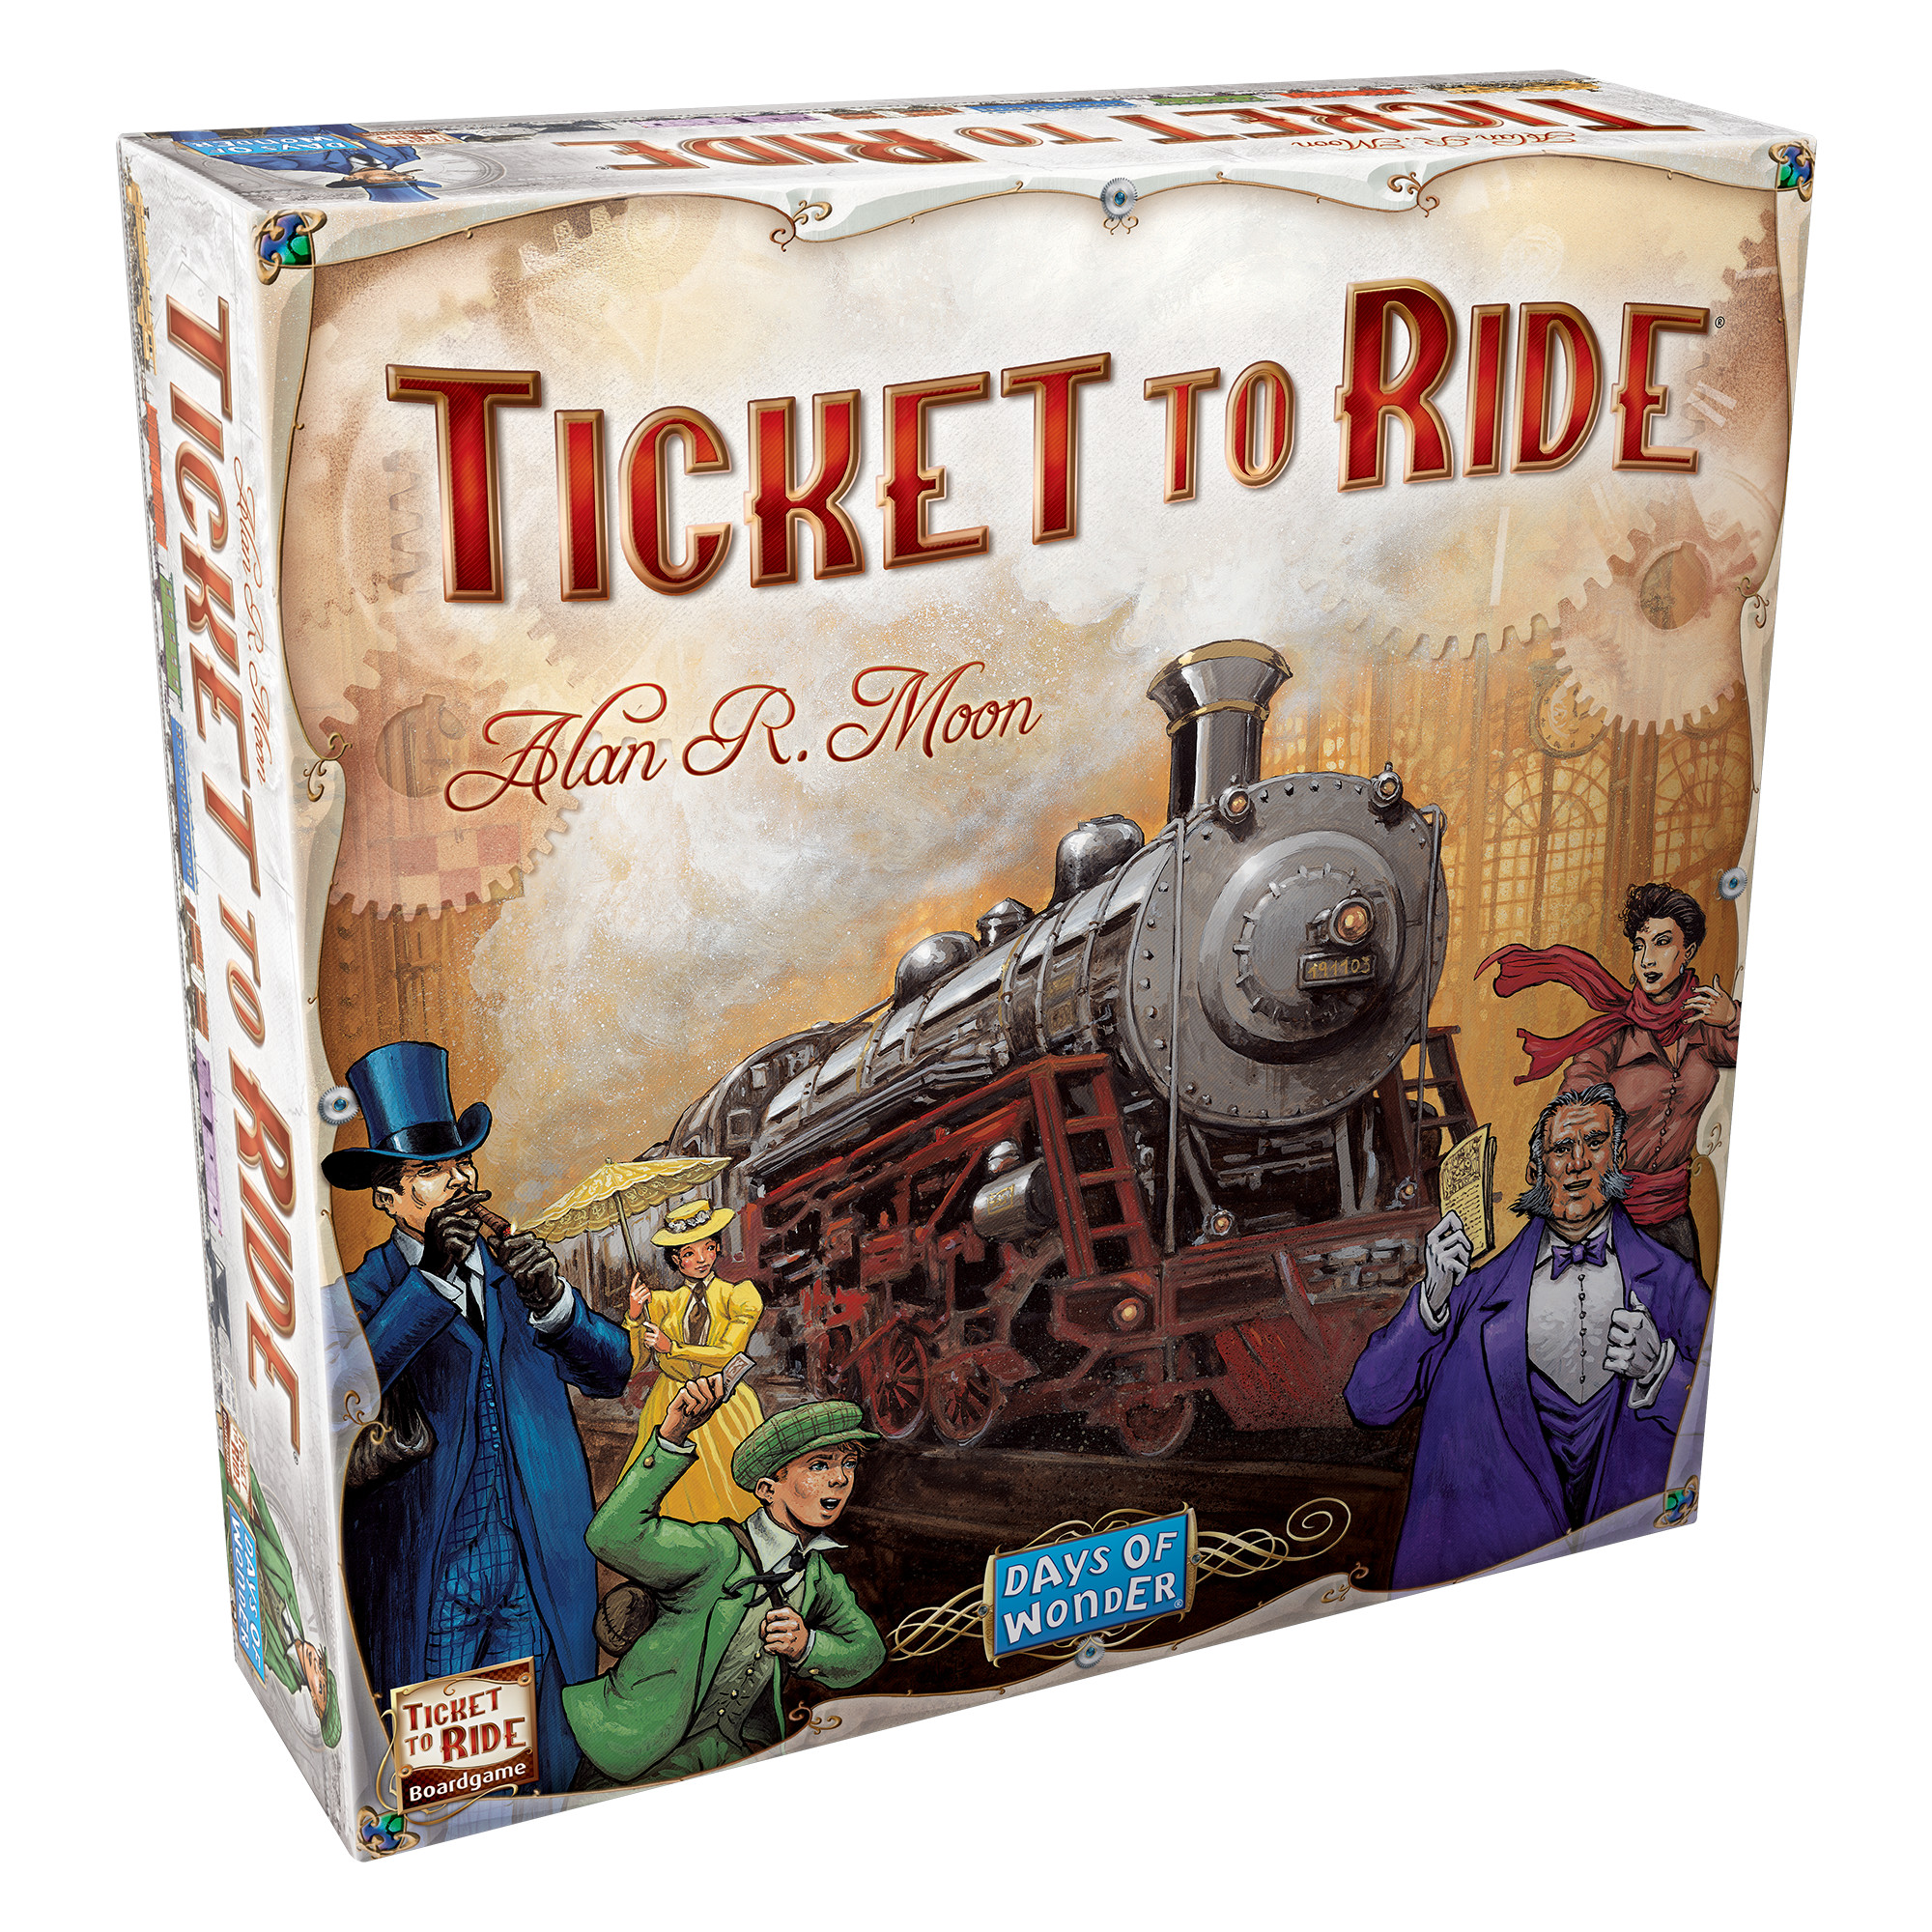 Ticket To Ride Strategy Board Game for Ages 8 and up, from Asmodee - image 1 of 8